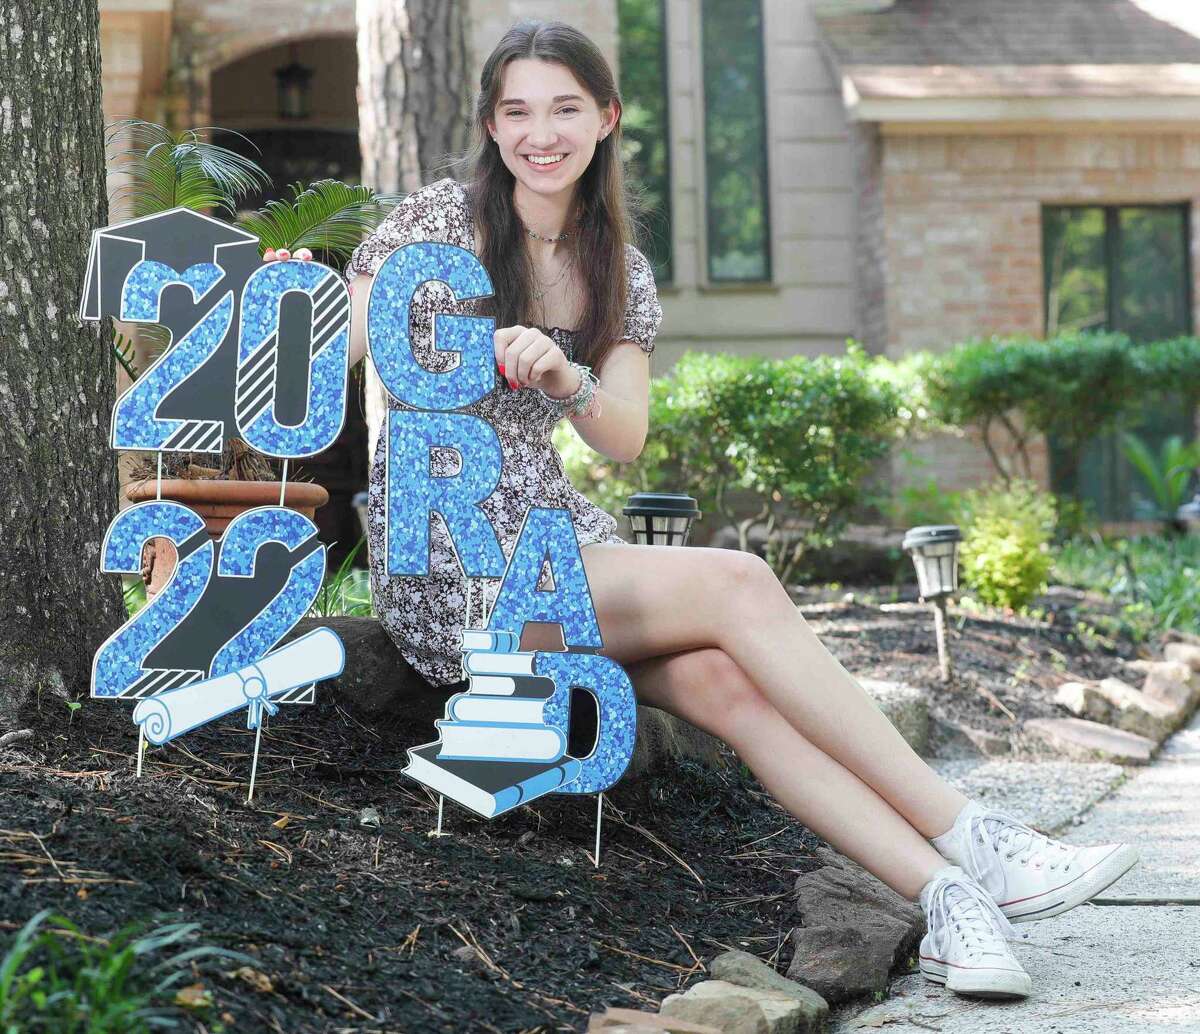 College Park High School’s Addison Rosenbaum was honored during her graduation ceremony for having perfect attendance since first attending Sally K. Ride Elementary School in 2009. Rosenbaum will student environmental engineering at Texas A&M.